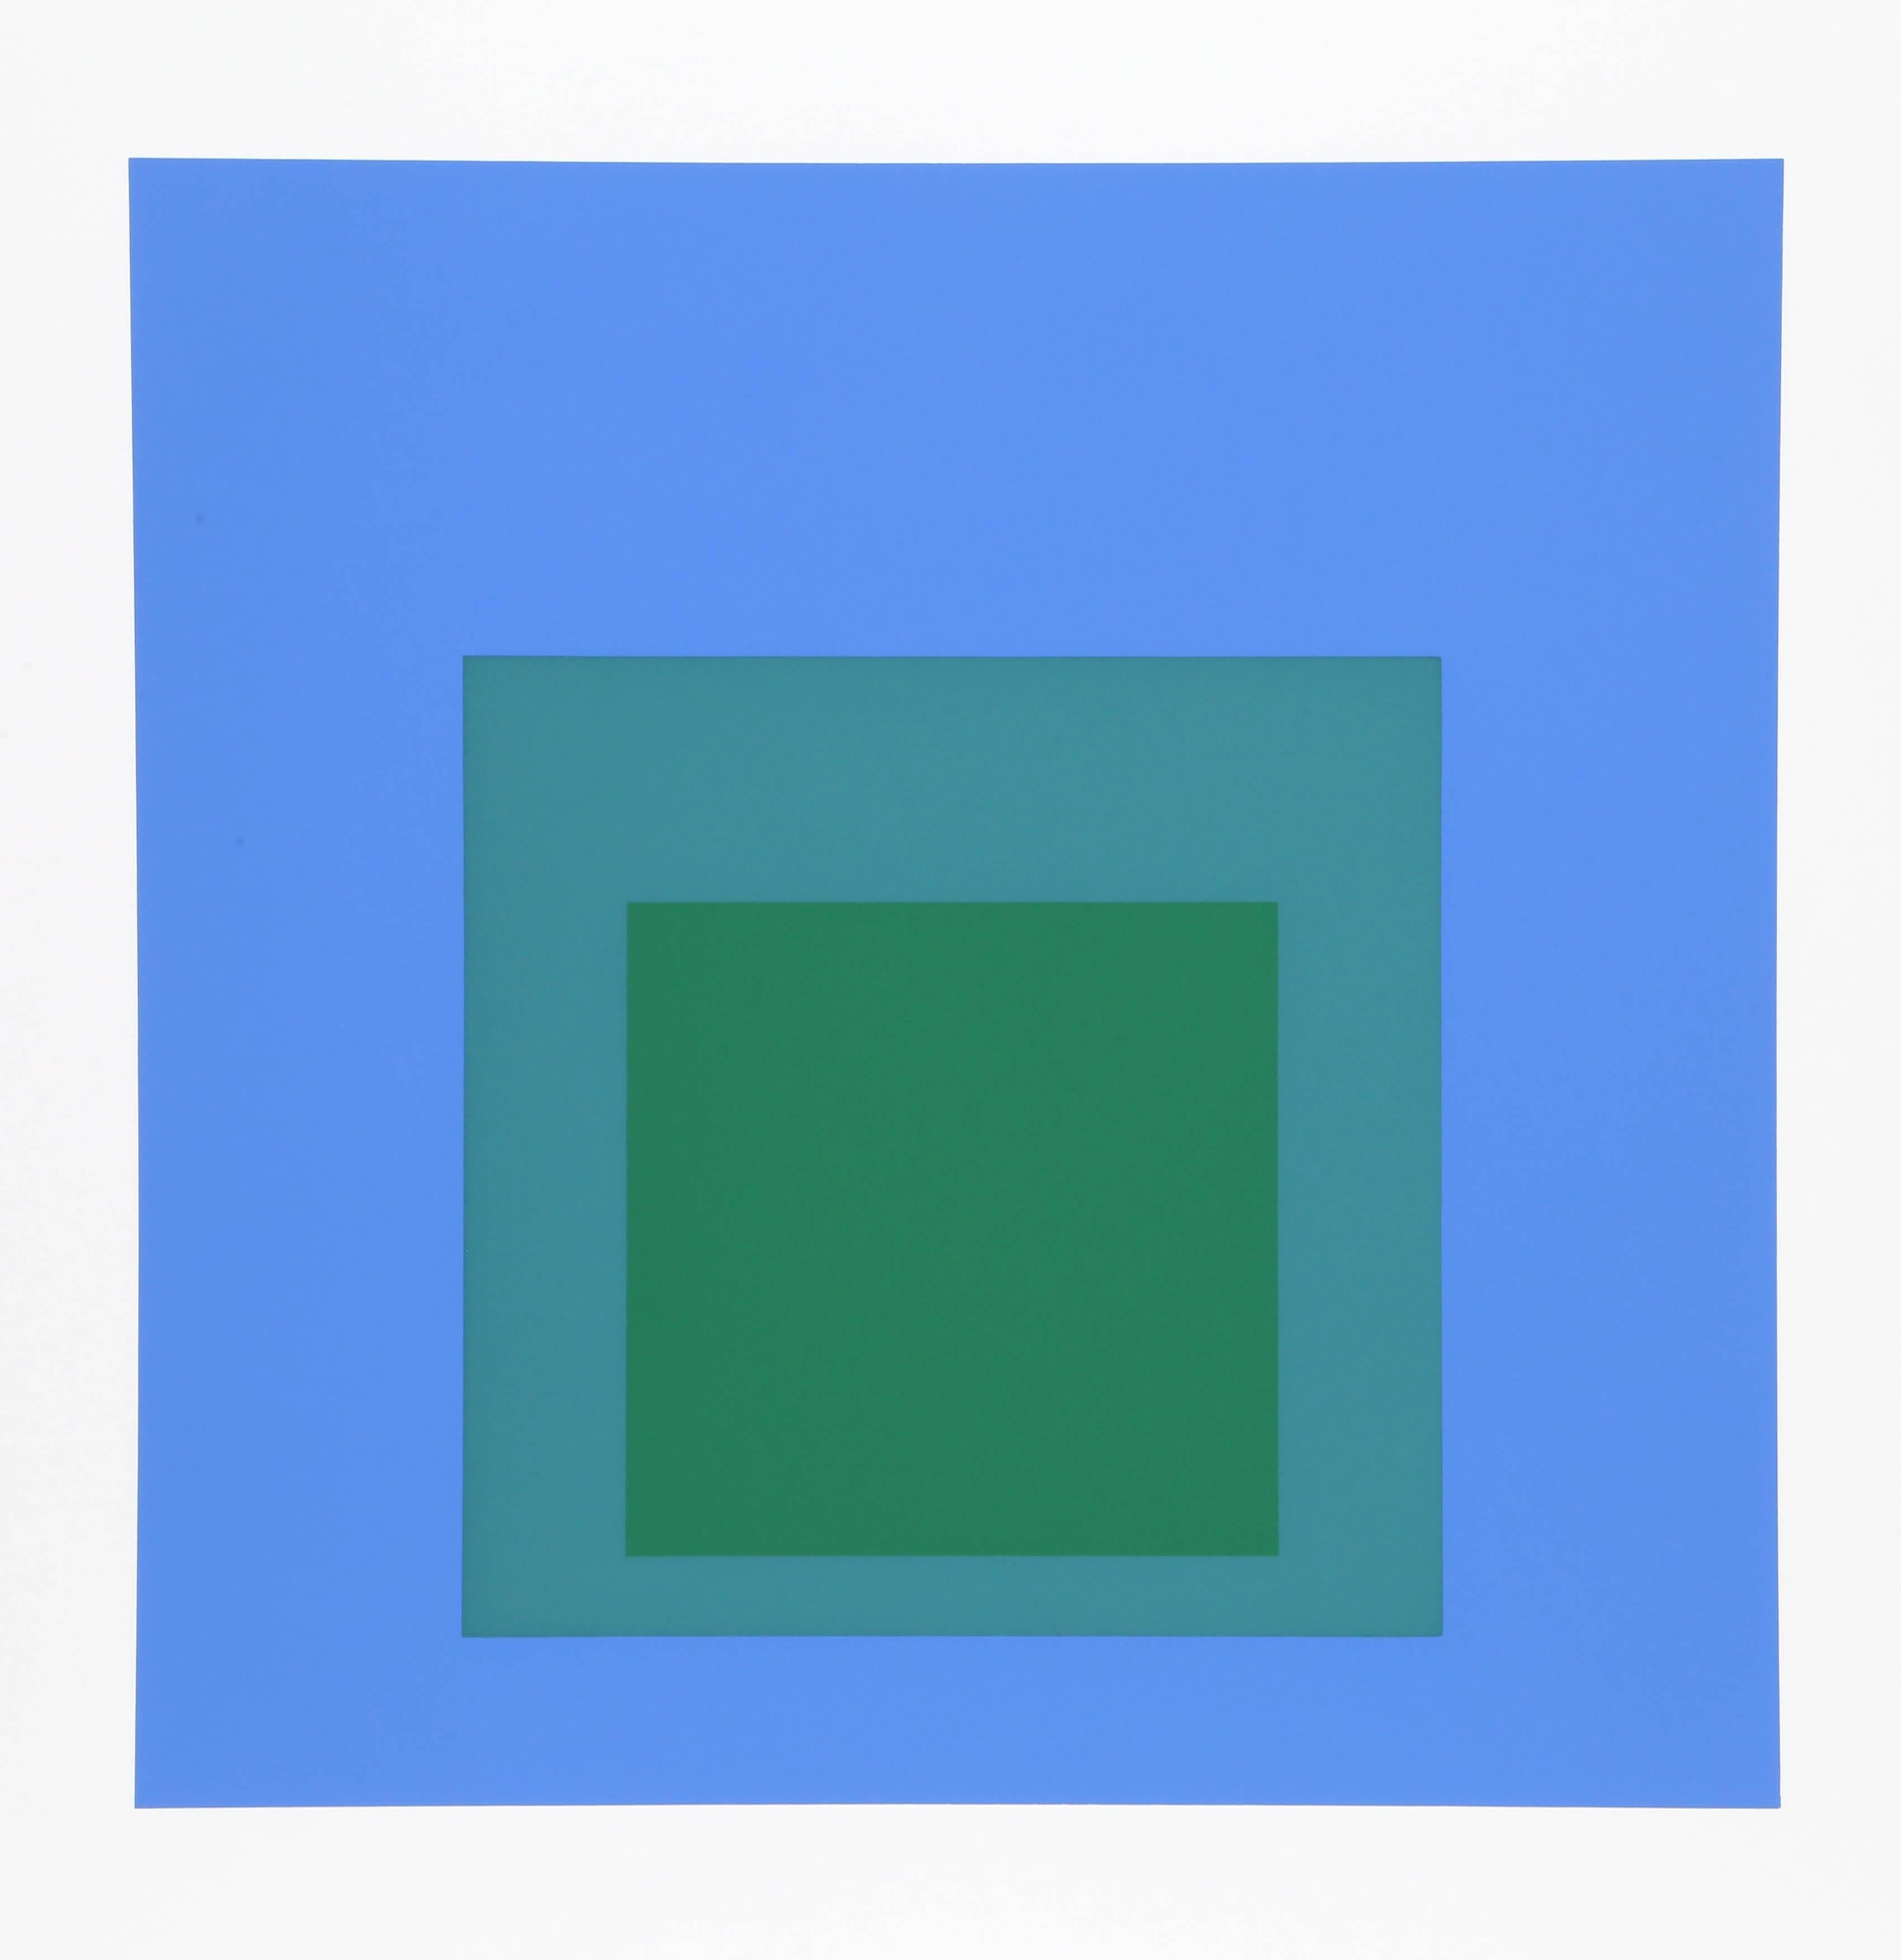 Homage to the Square from Formulation: Articulation - Print by Josef Albers